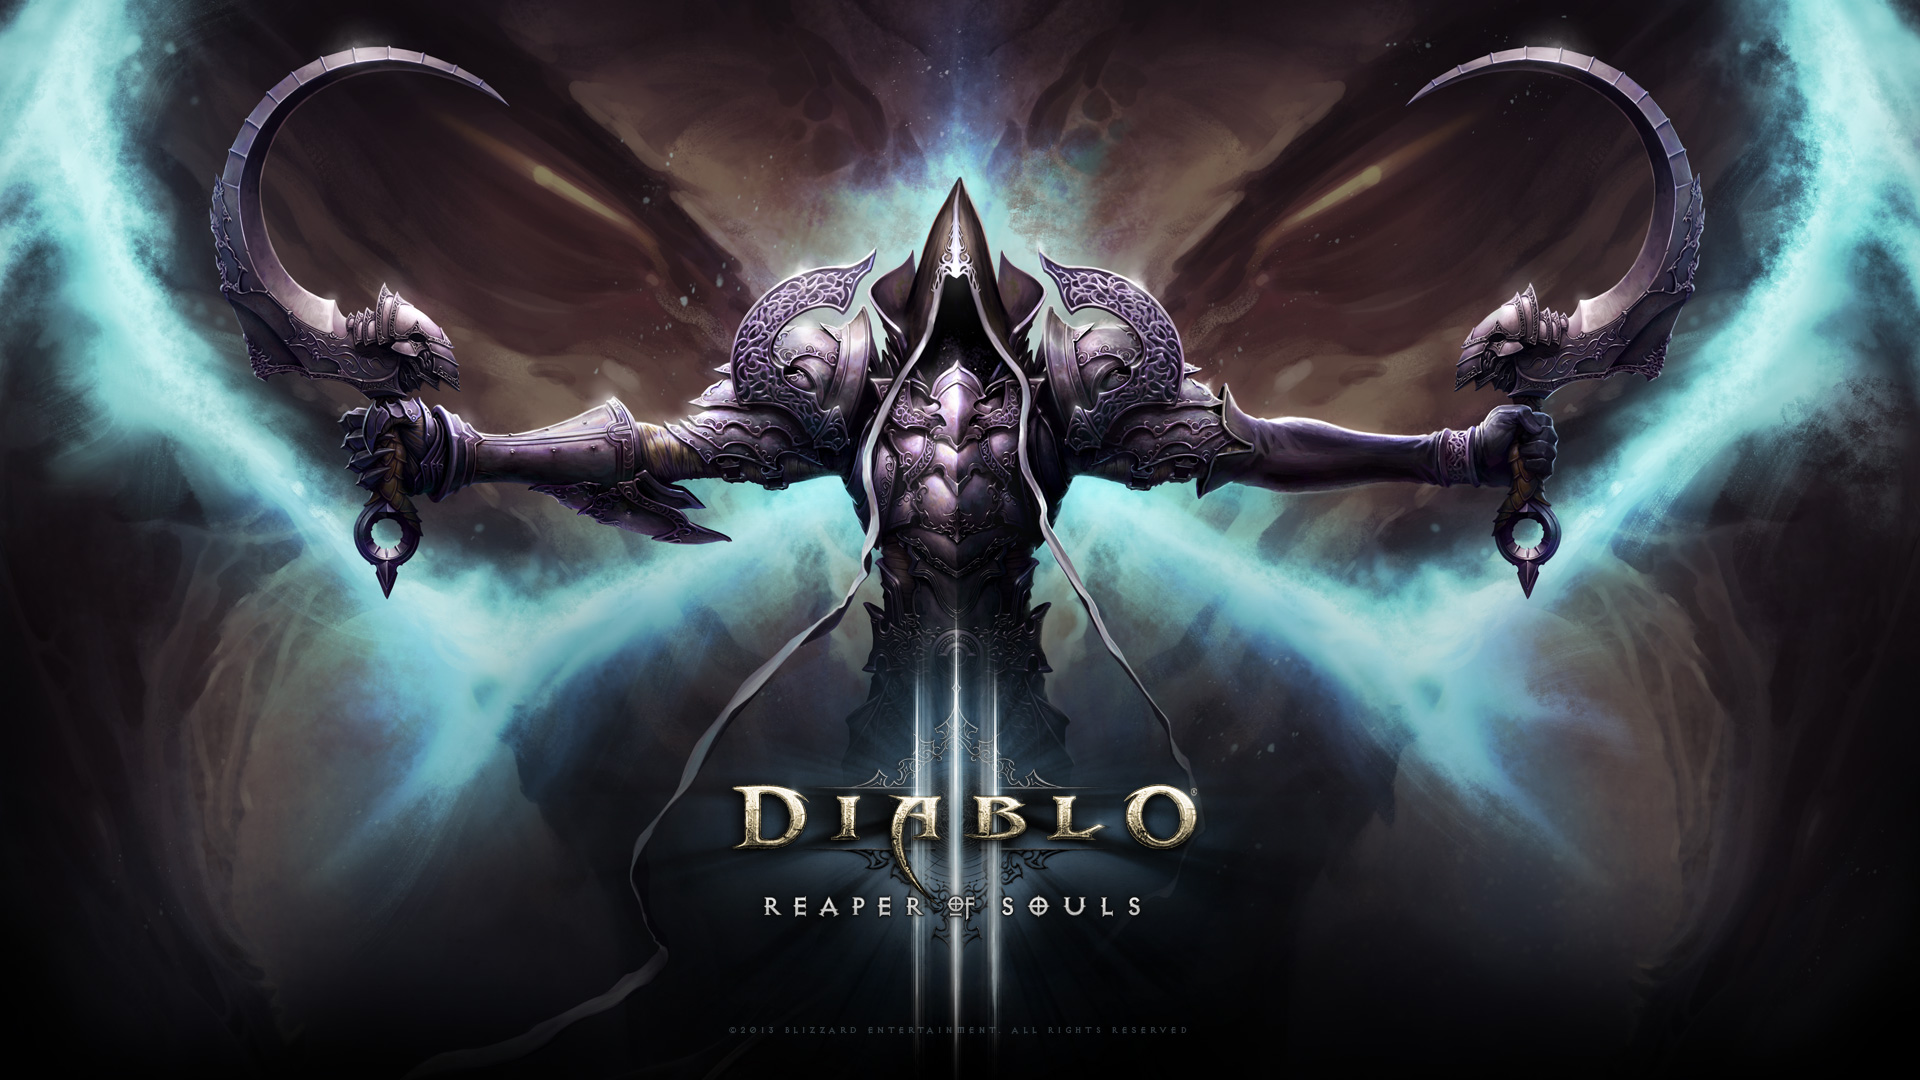 The New Gallery Of Diablo HD Wallpaper And Image To